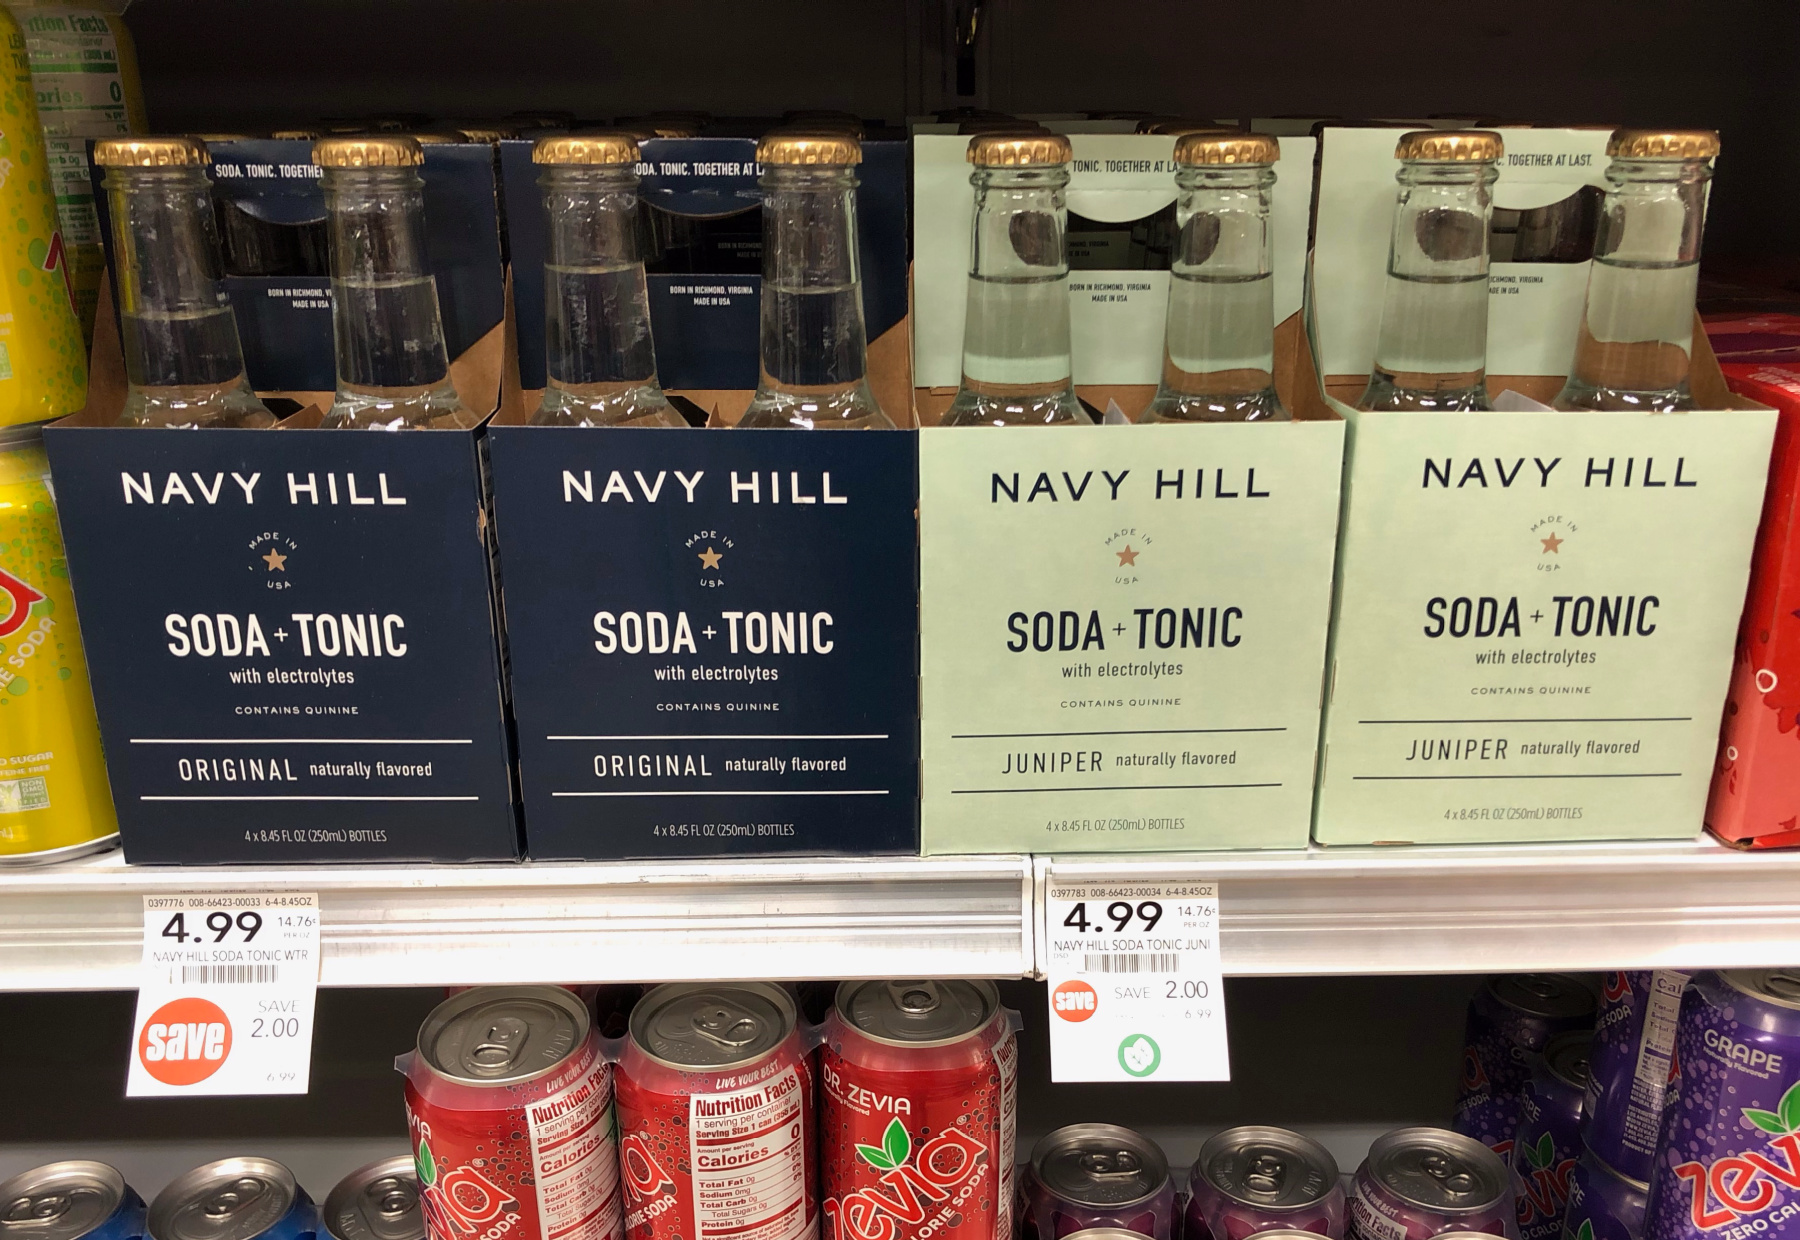 Huge Discount On Navy Hill Mixers At Publix - Save On A Delicious Soda/Tonic Blend! on I Heart Publix